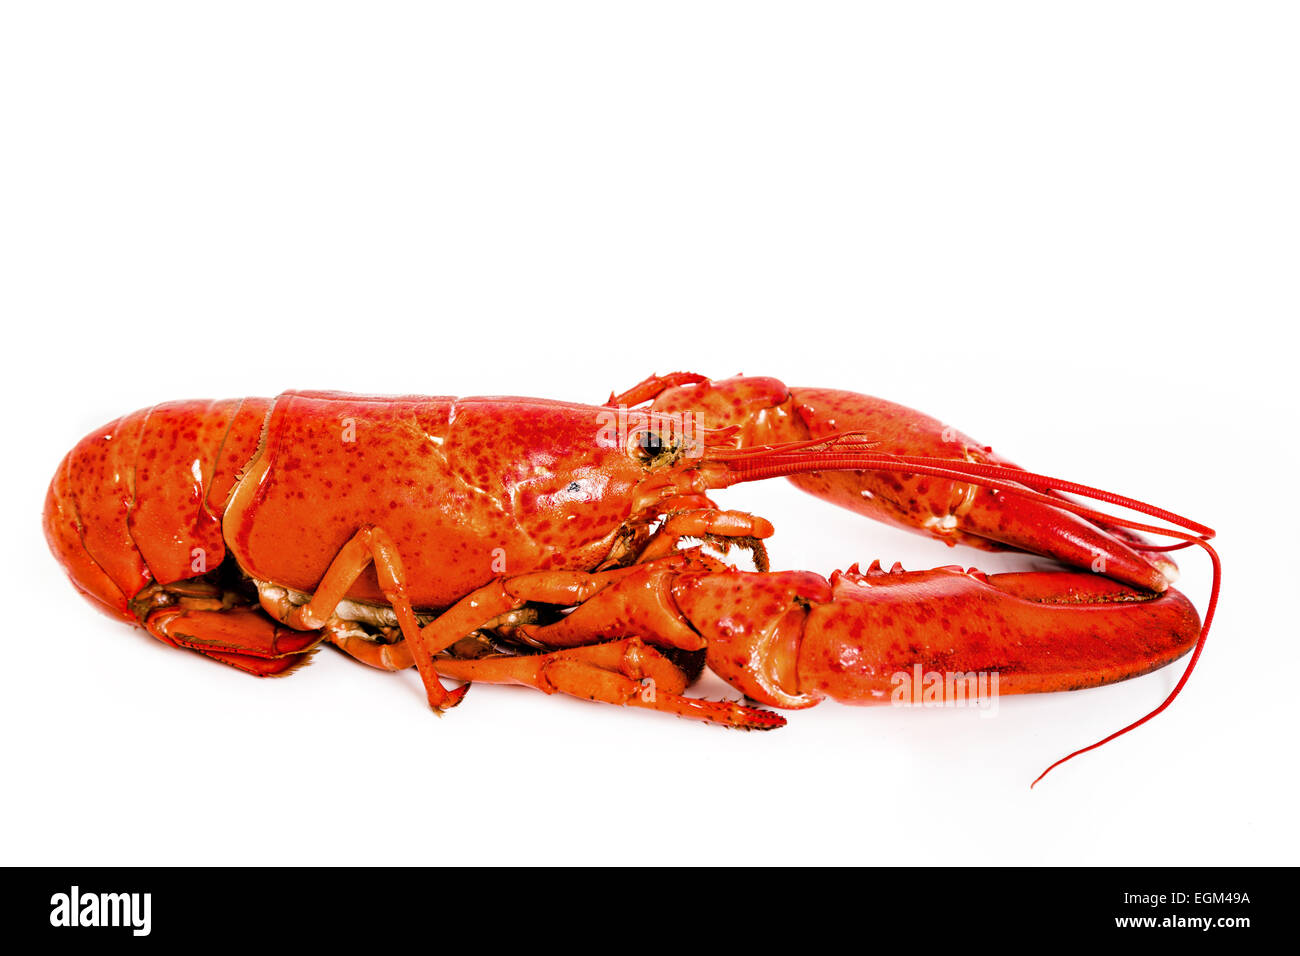 Boiled lobster on a white background. Stock Photo